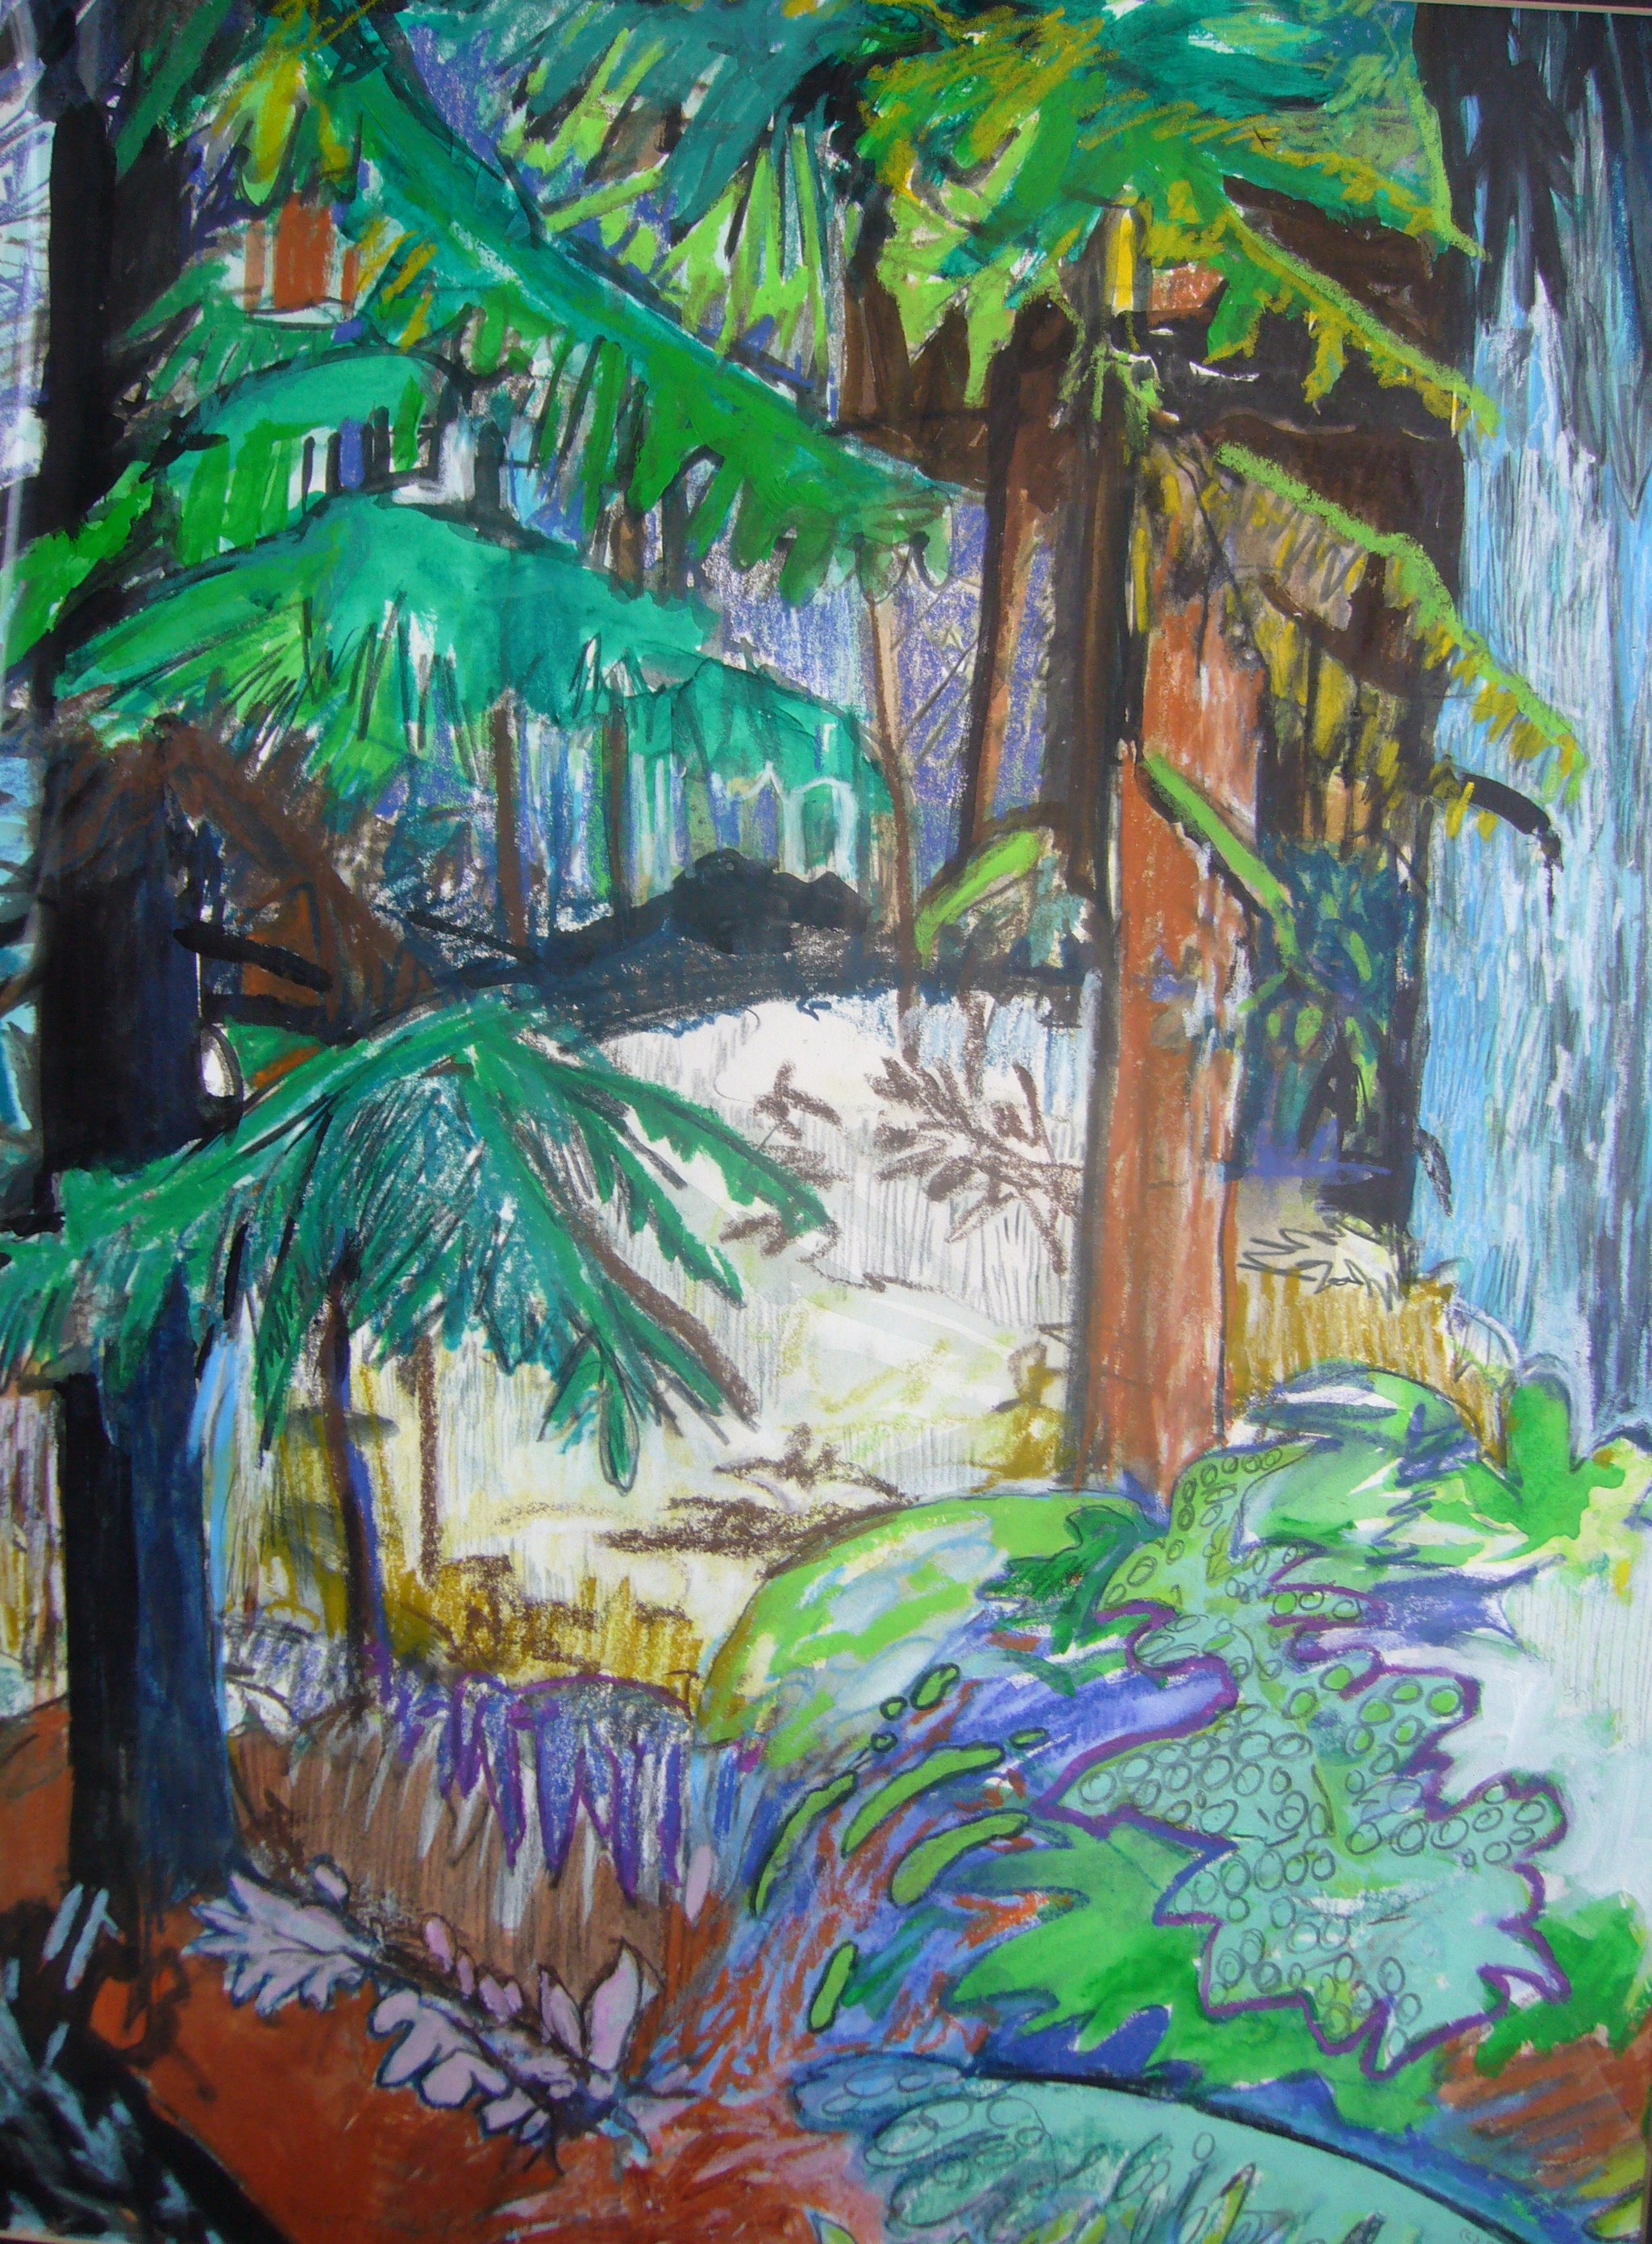 Rainforest Drawing Easy at PaintingValley.com | Explore collection of